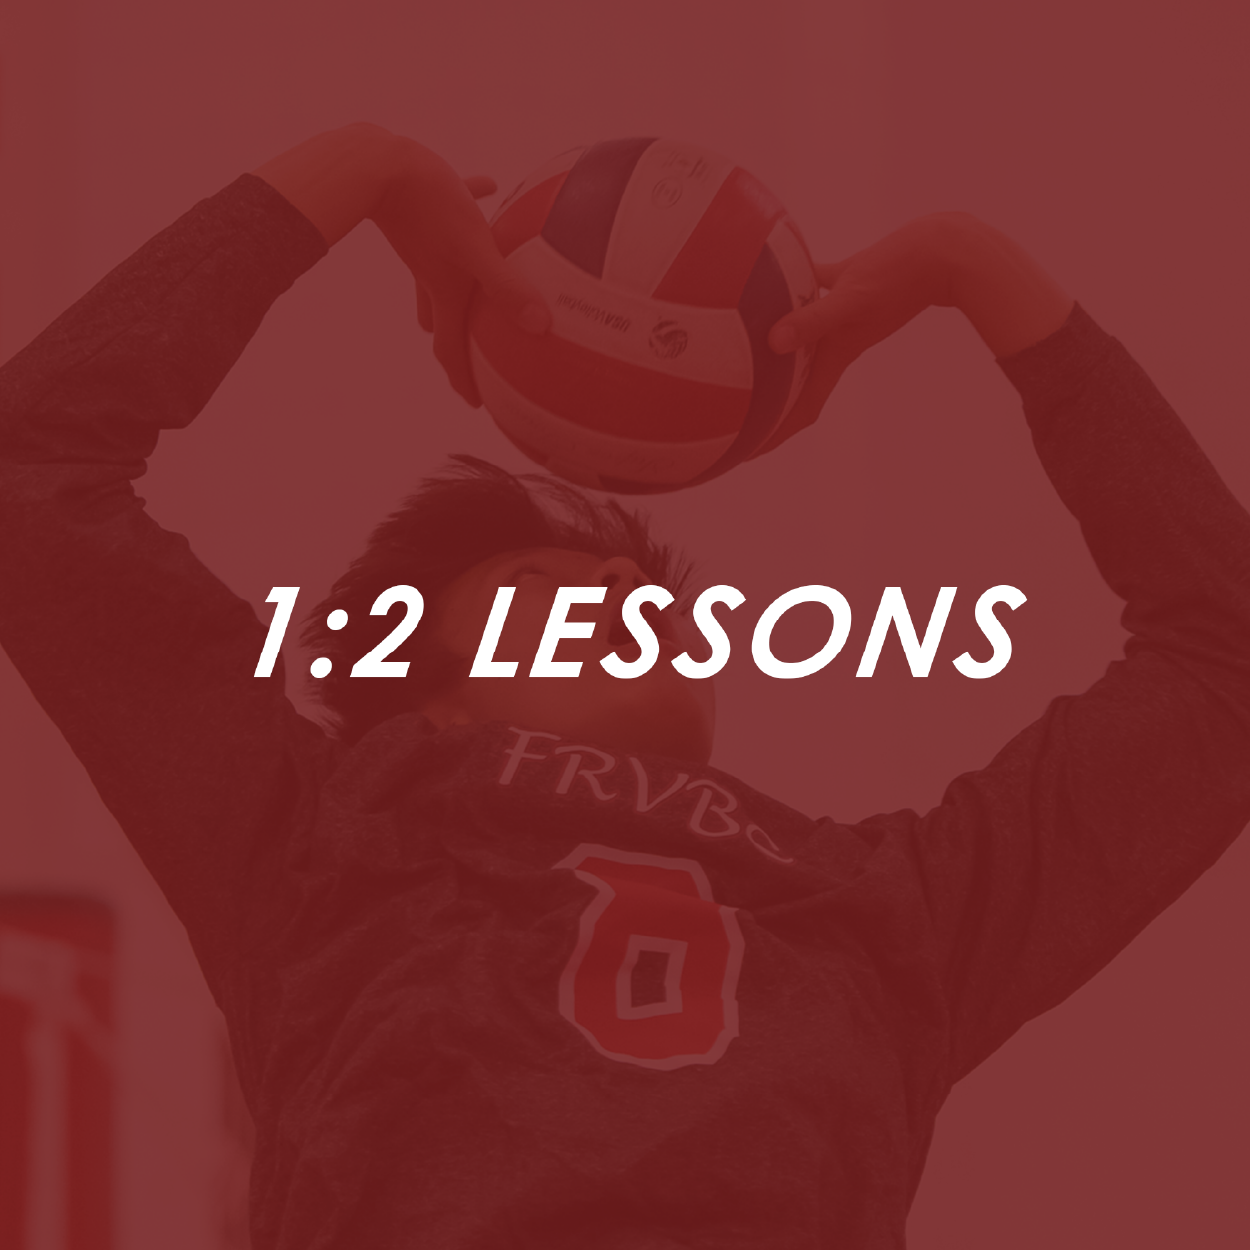 https://www.frvbc.com/wp-content/uploads/2021/02/FR-Bookings1-2Lessons.png